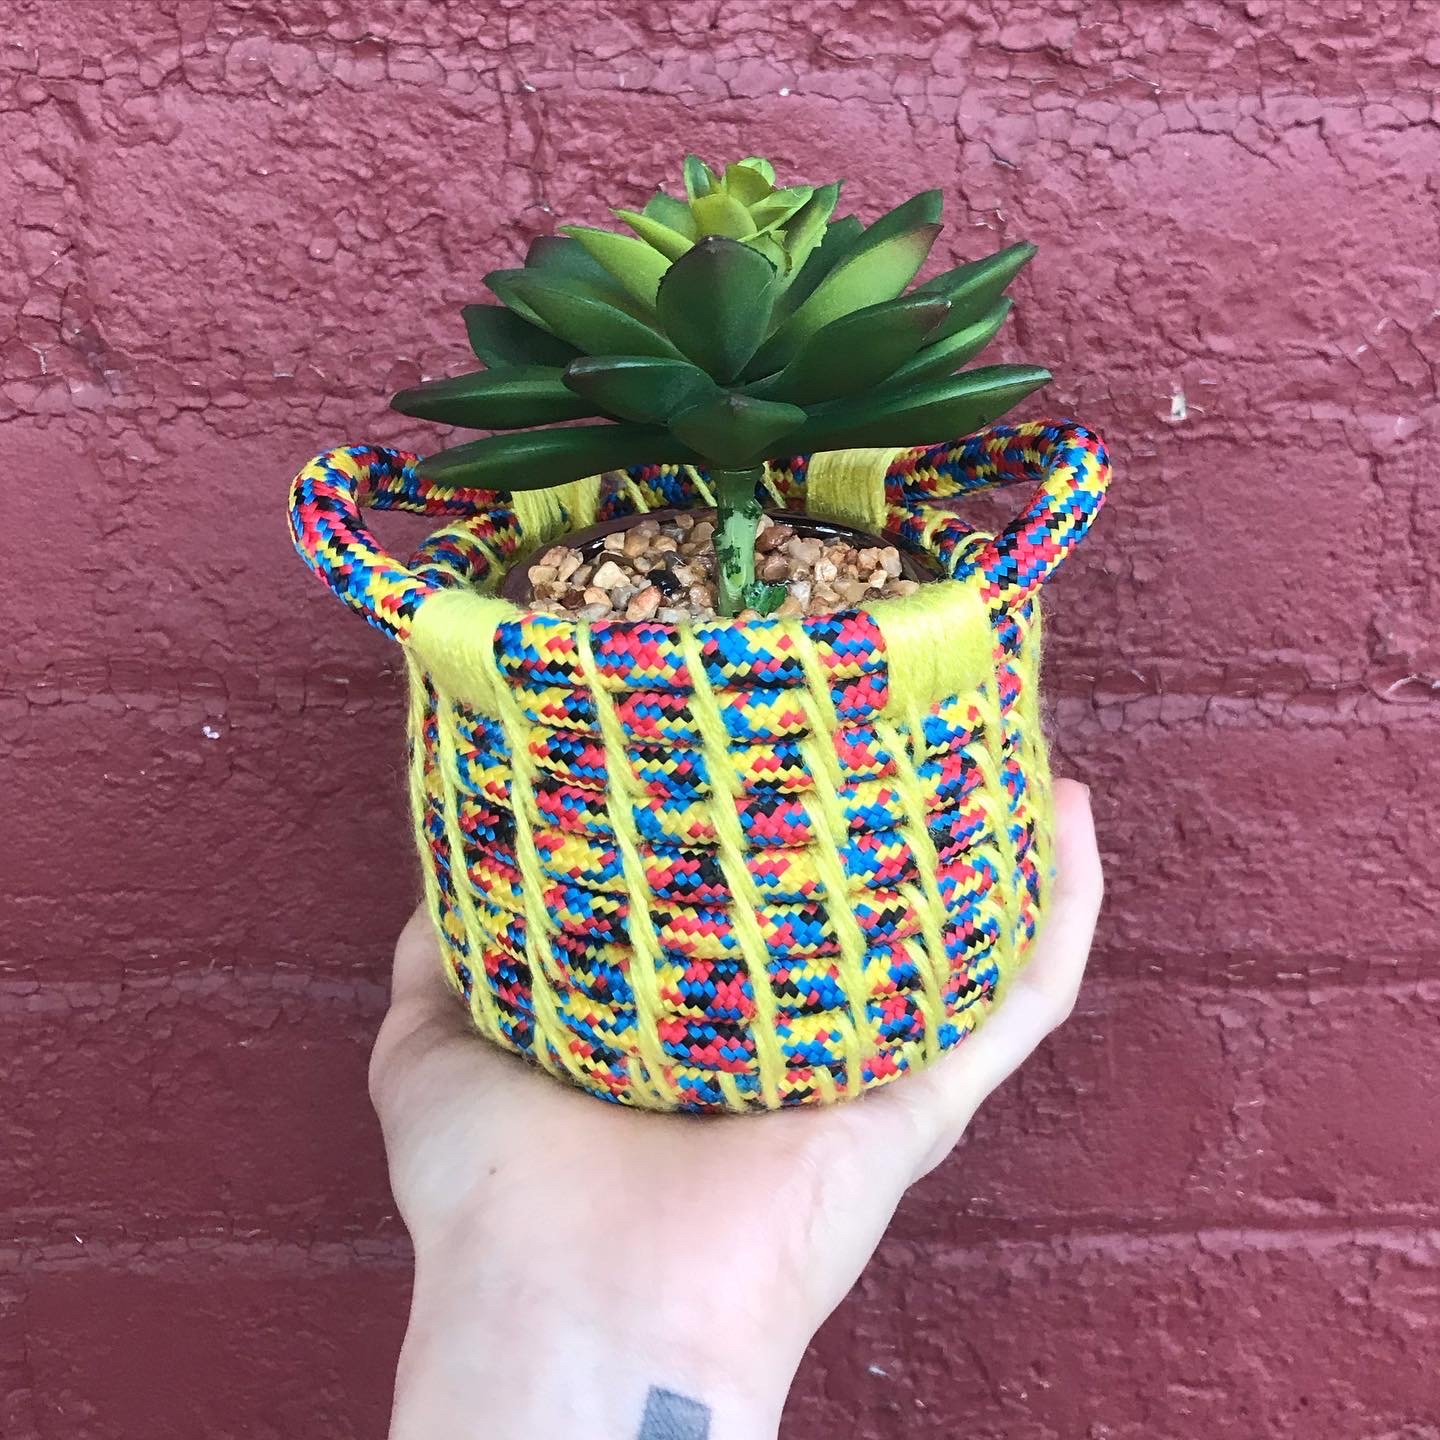 Fashion plant with handwoven pot